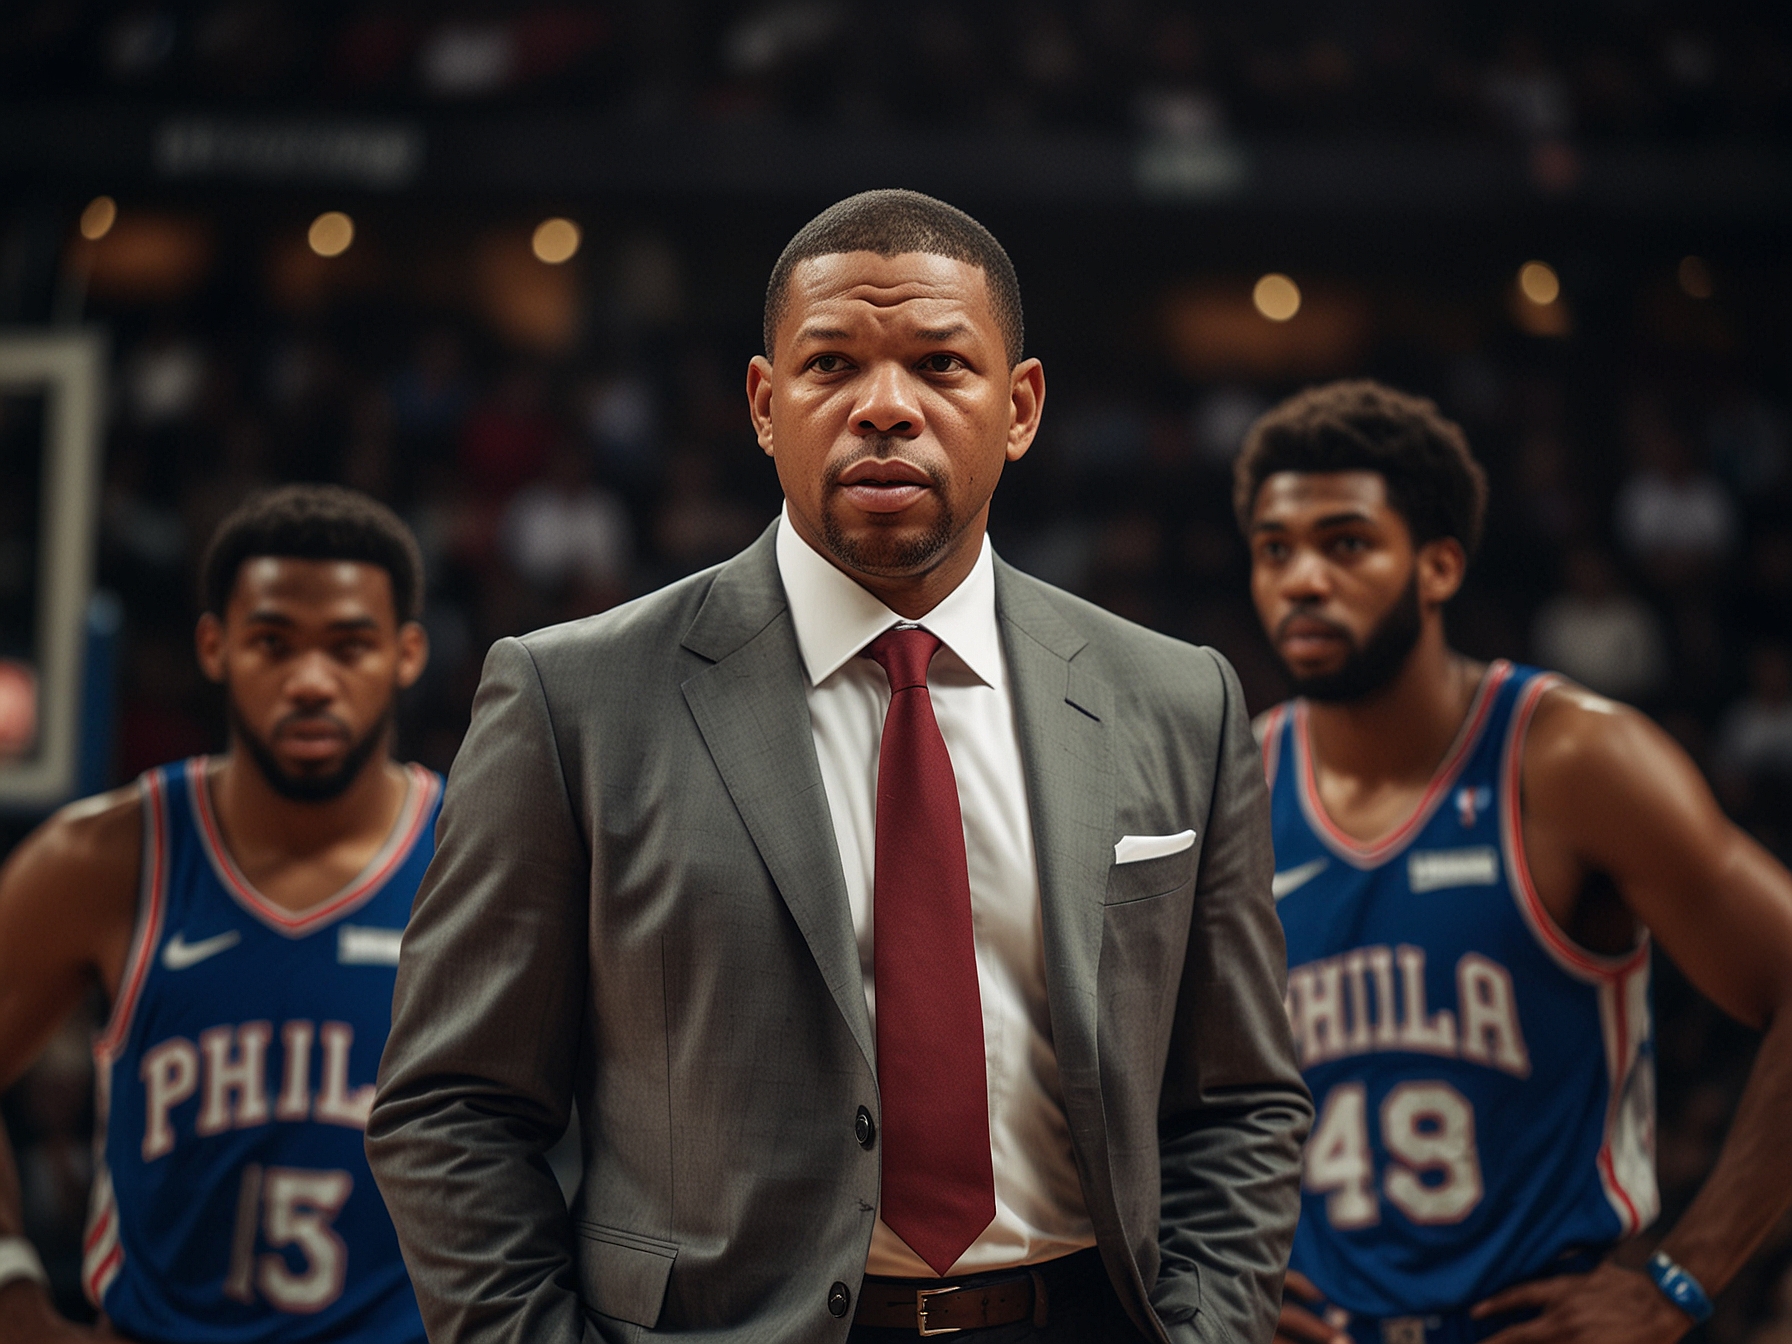 Philadelphia 76ers’ head coach Doc Rivers discussing tactics with players on the sidelines. Bringing in Caldwell-Pope could provide Rivers with greater rotational flexibility and strategic depth.